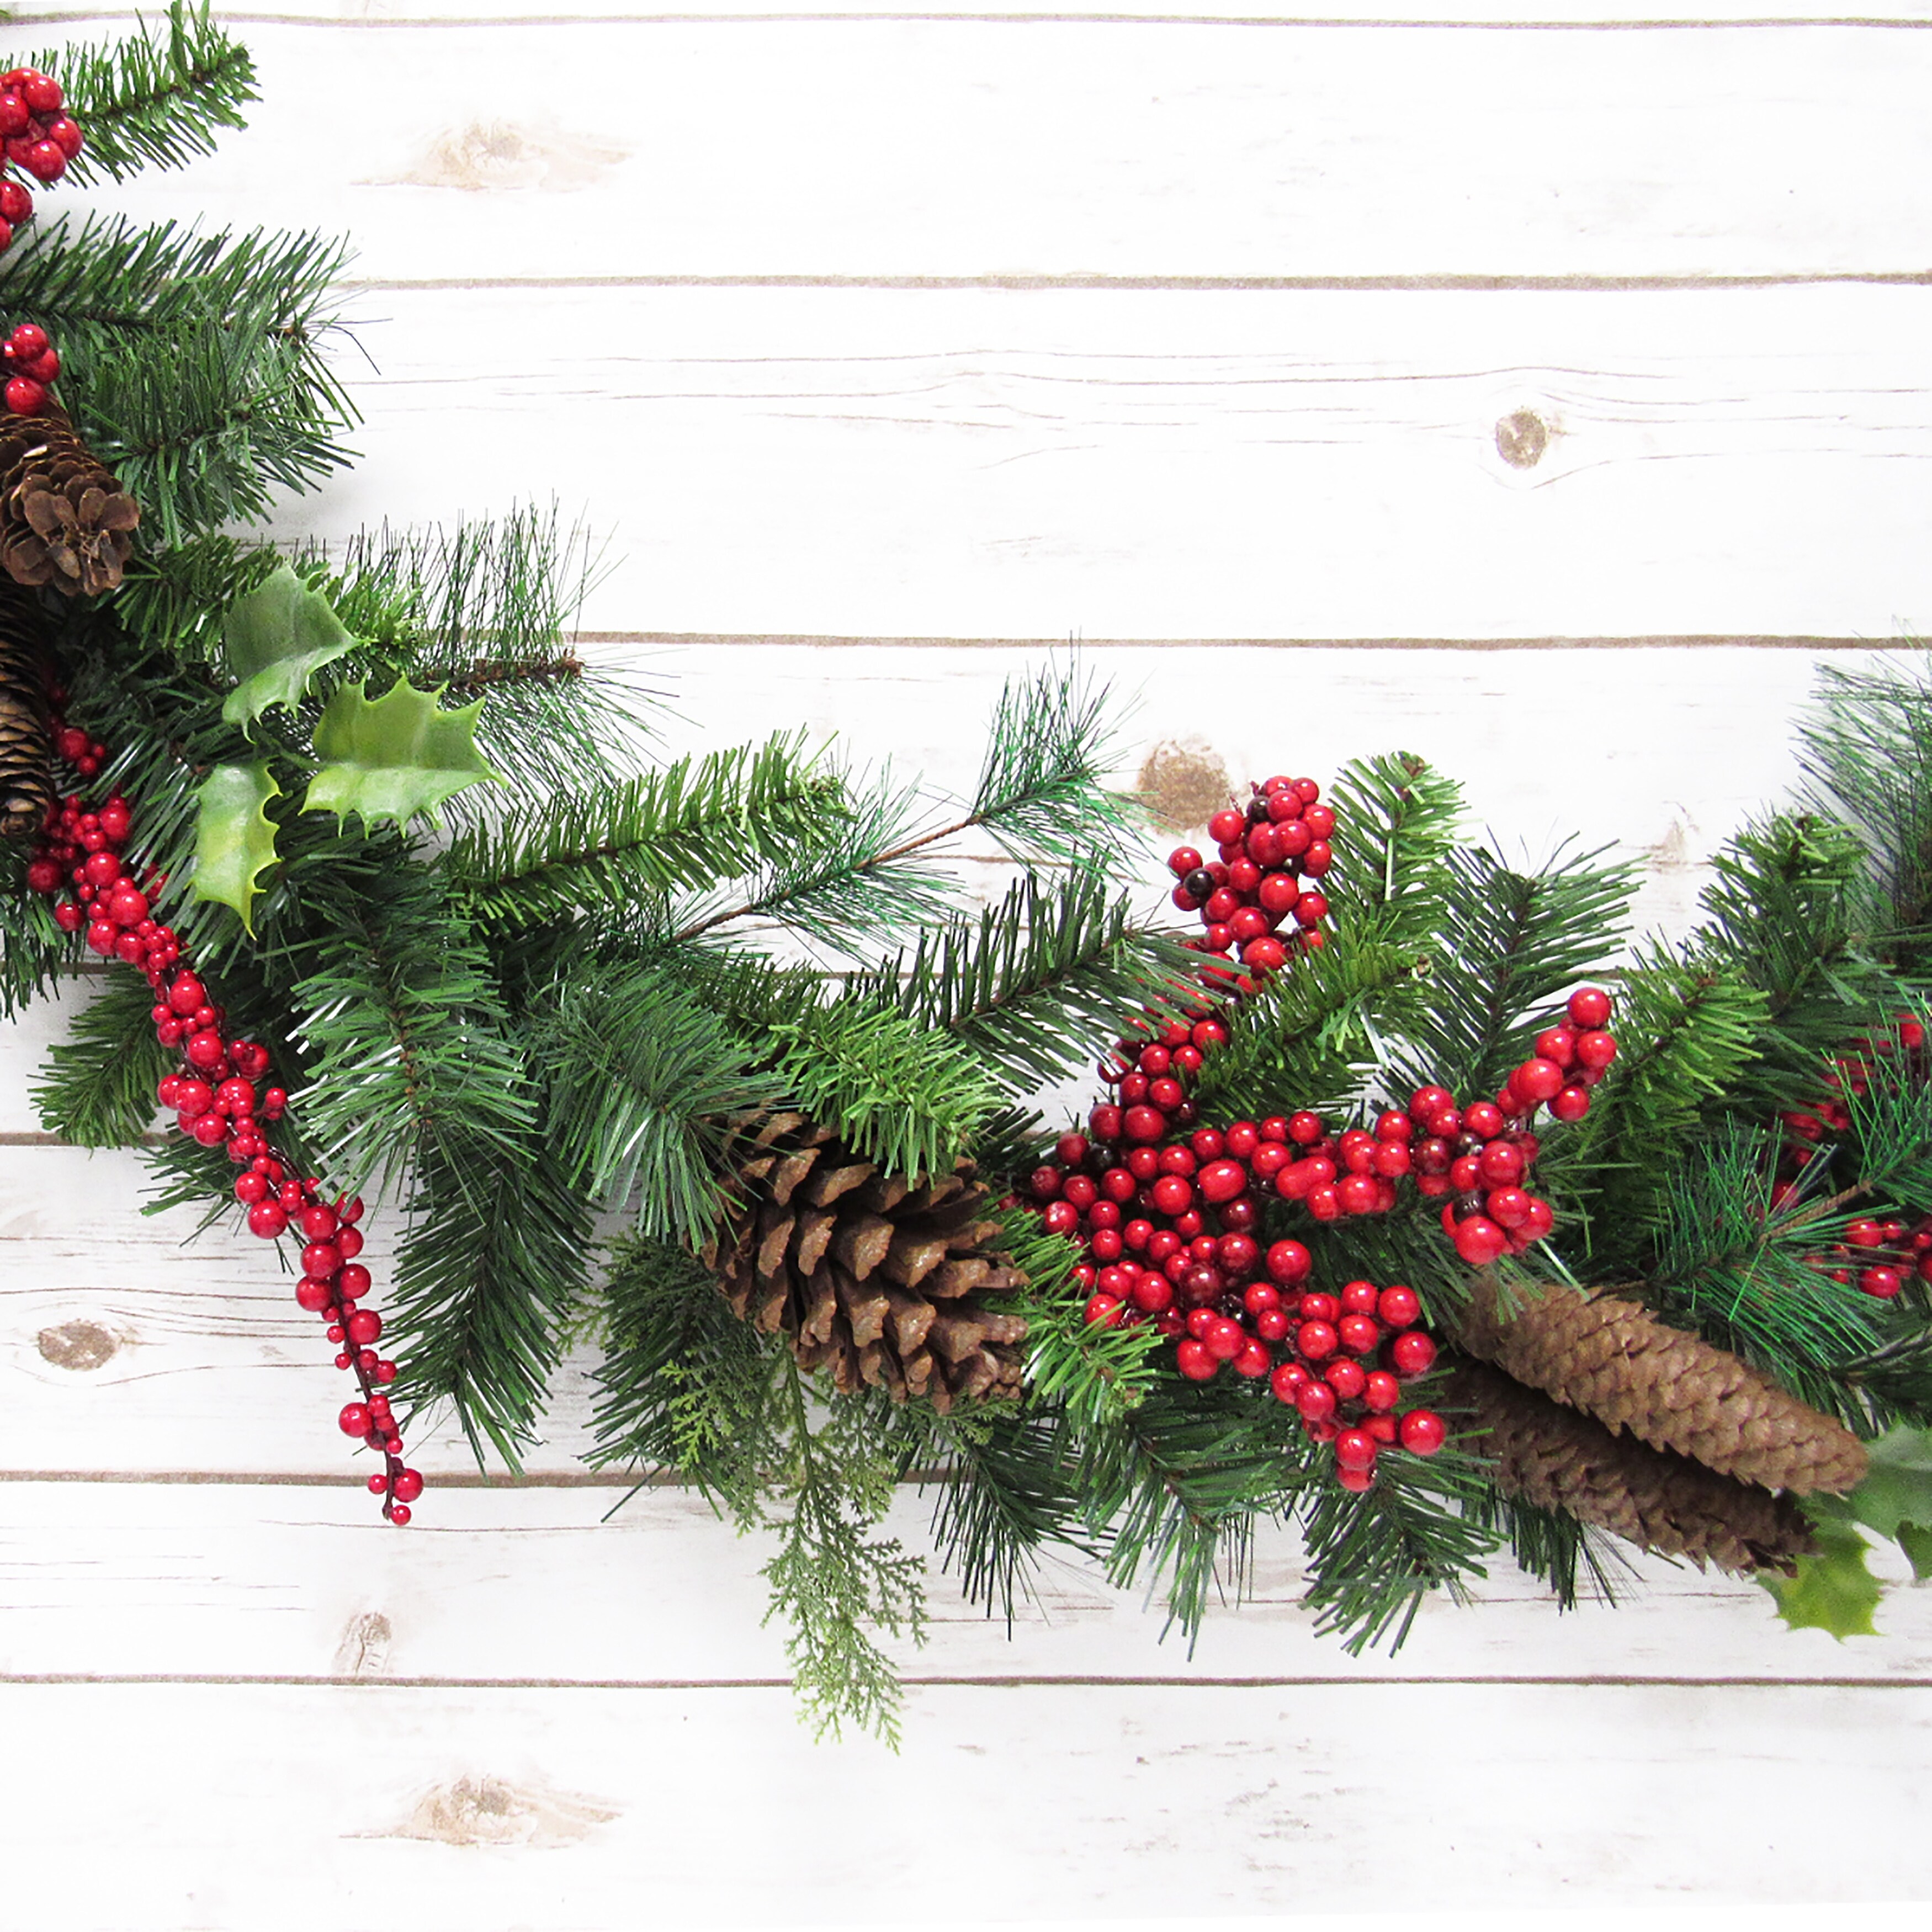 Snowy Artificial Pine Cone Garland with Red Berries Christmas Decor